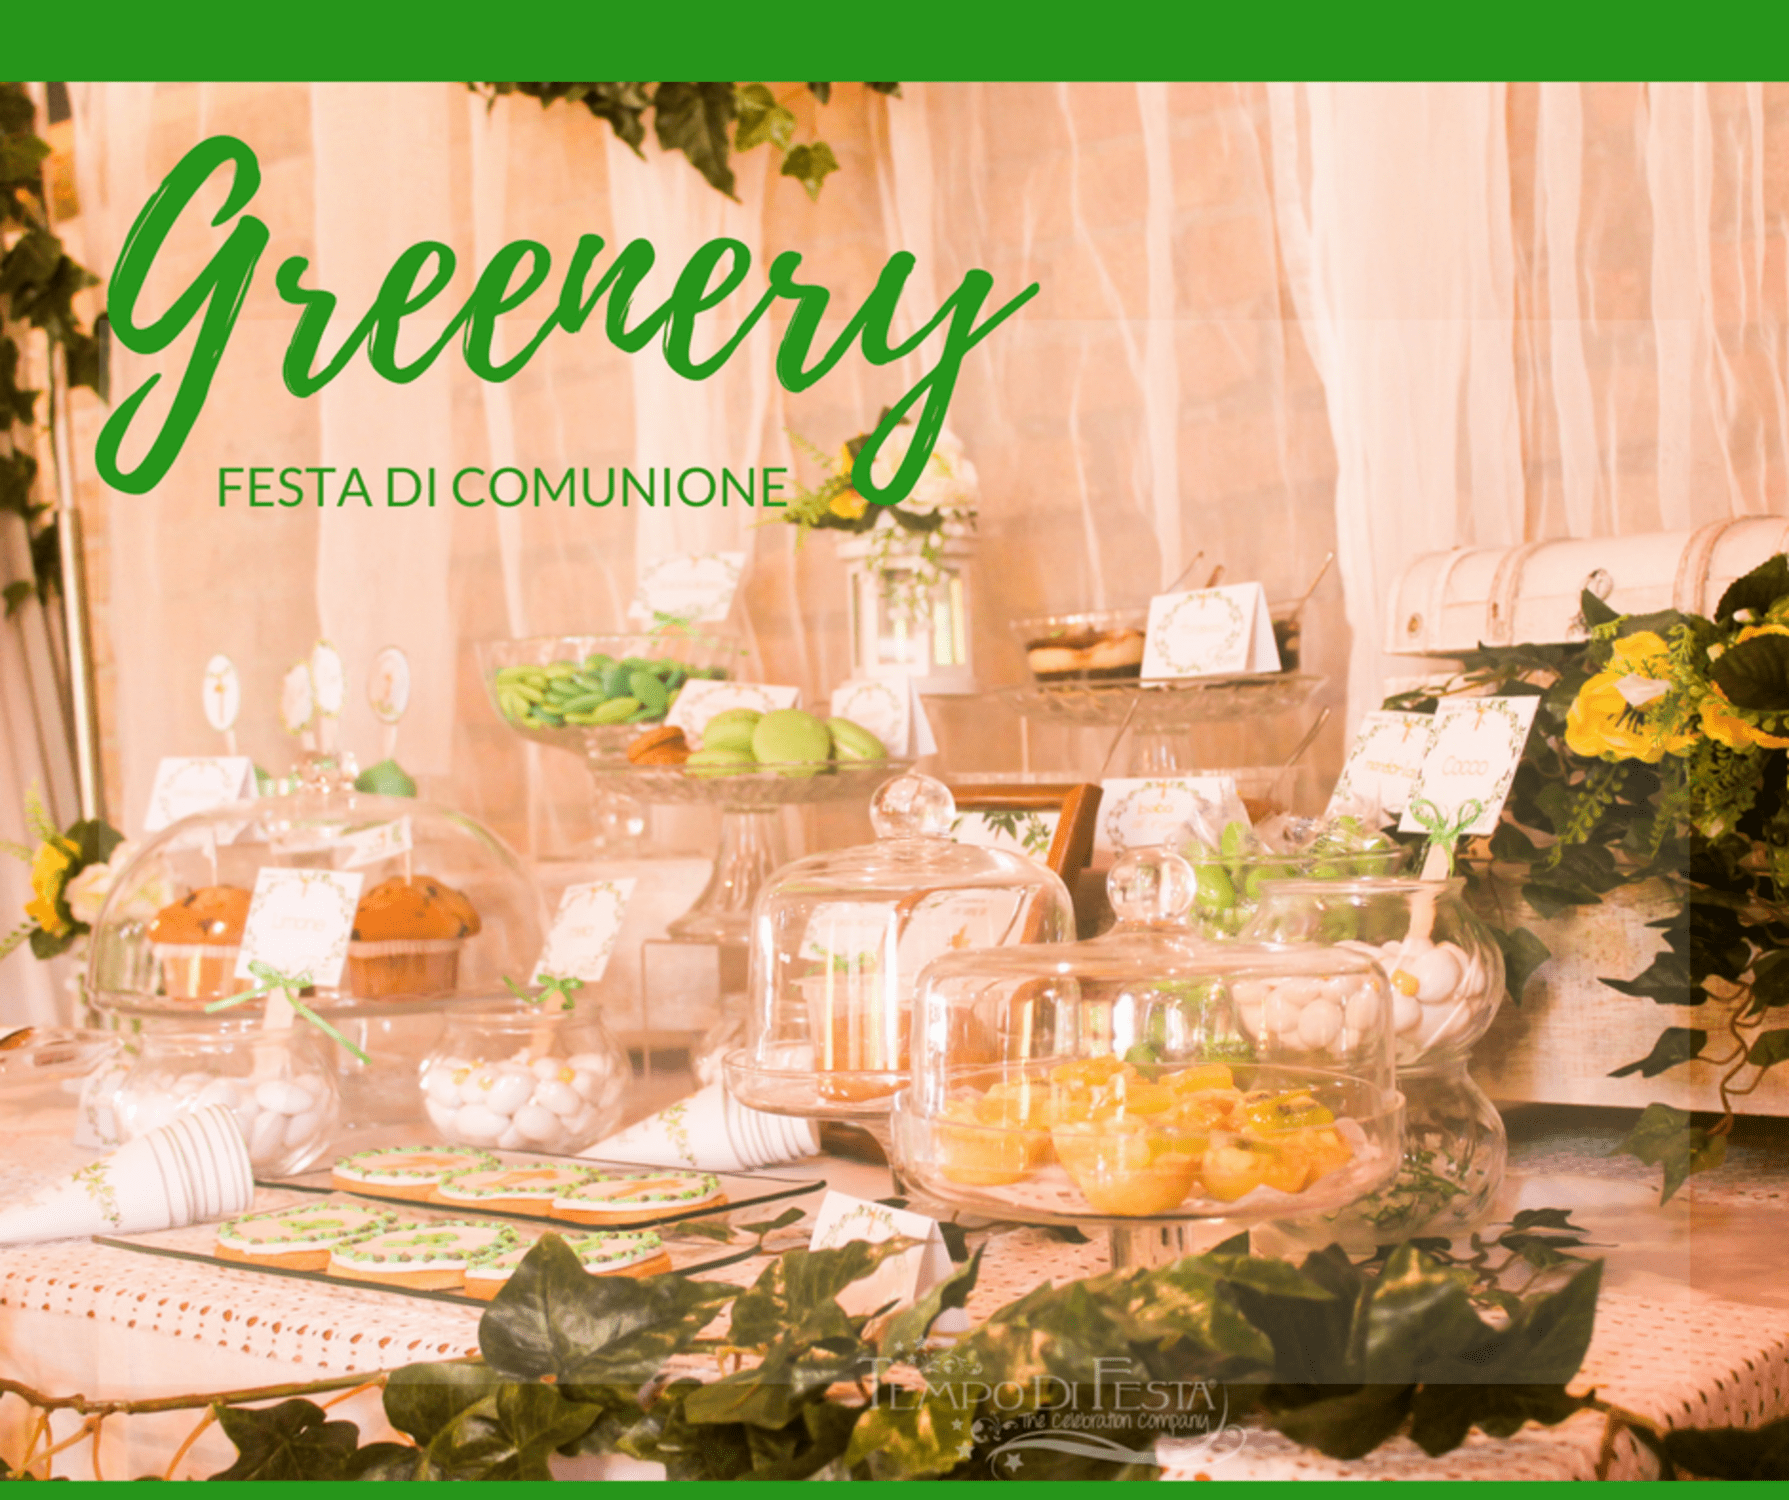 Greenery party